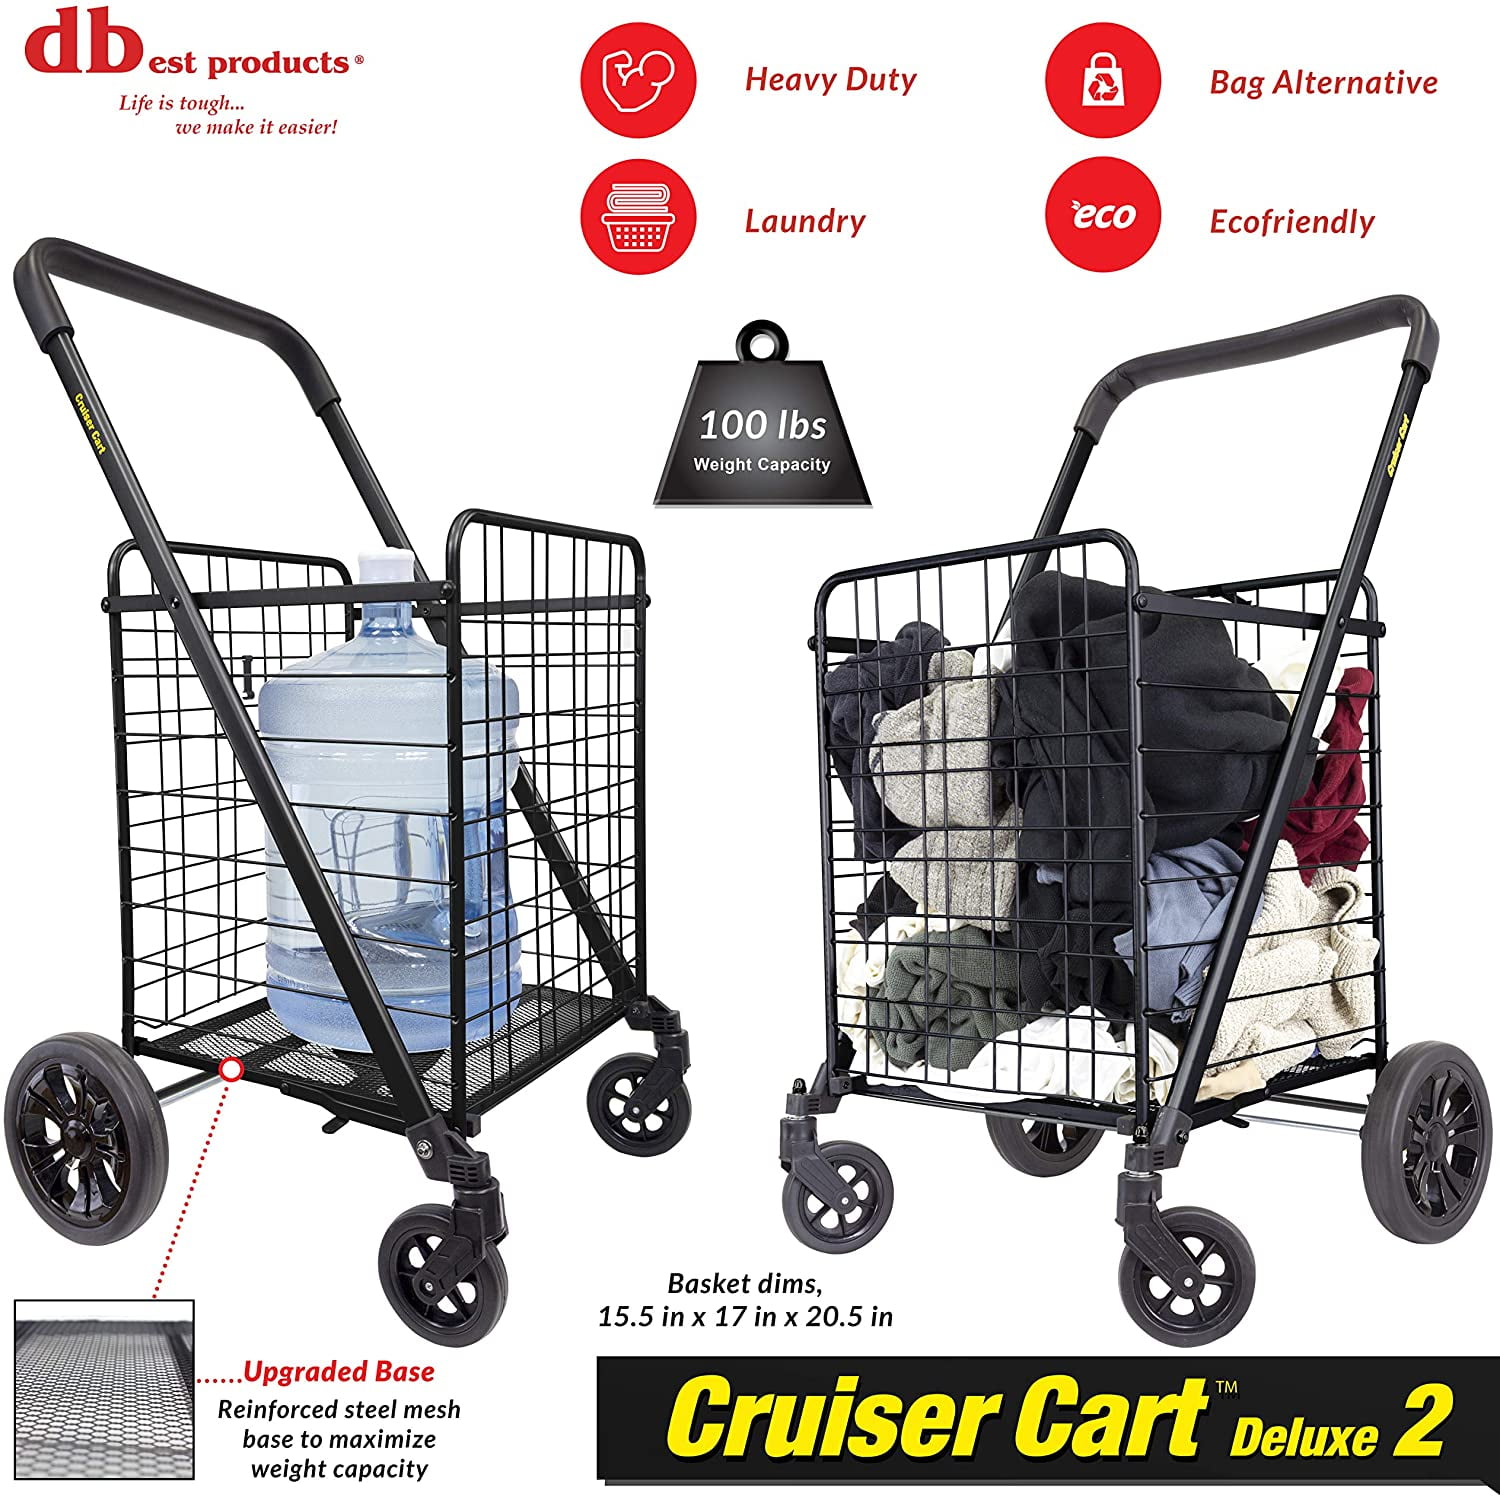 dbest Products Cruiser Cart Deluxe 2 Germ Guard Bundle Shopping Handle Grocery Rolling Folding Laundry Basket on Wheels Foldable Utility Trolley Compact Lightweight Collapsible 